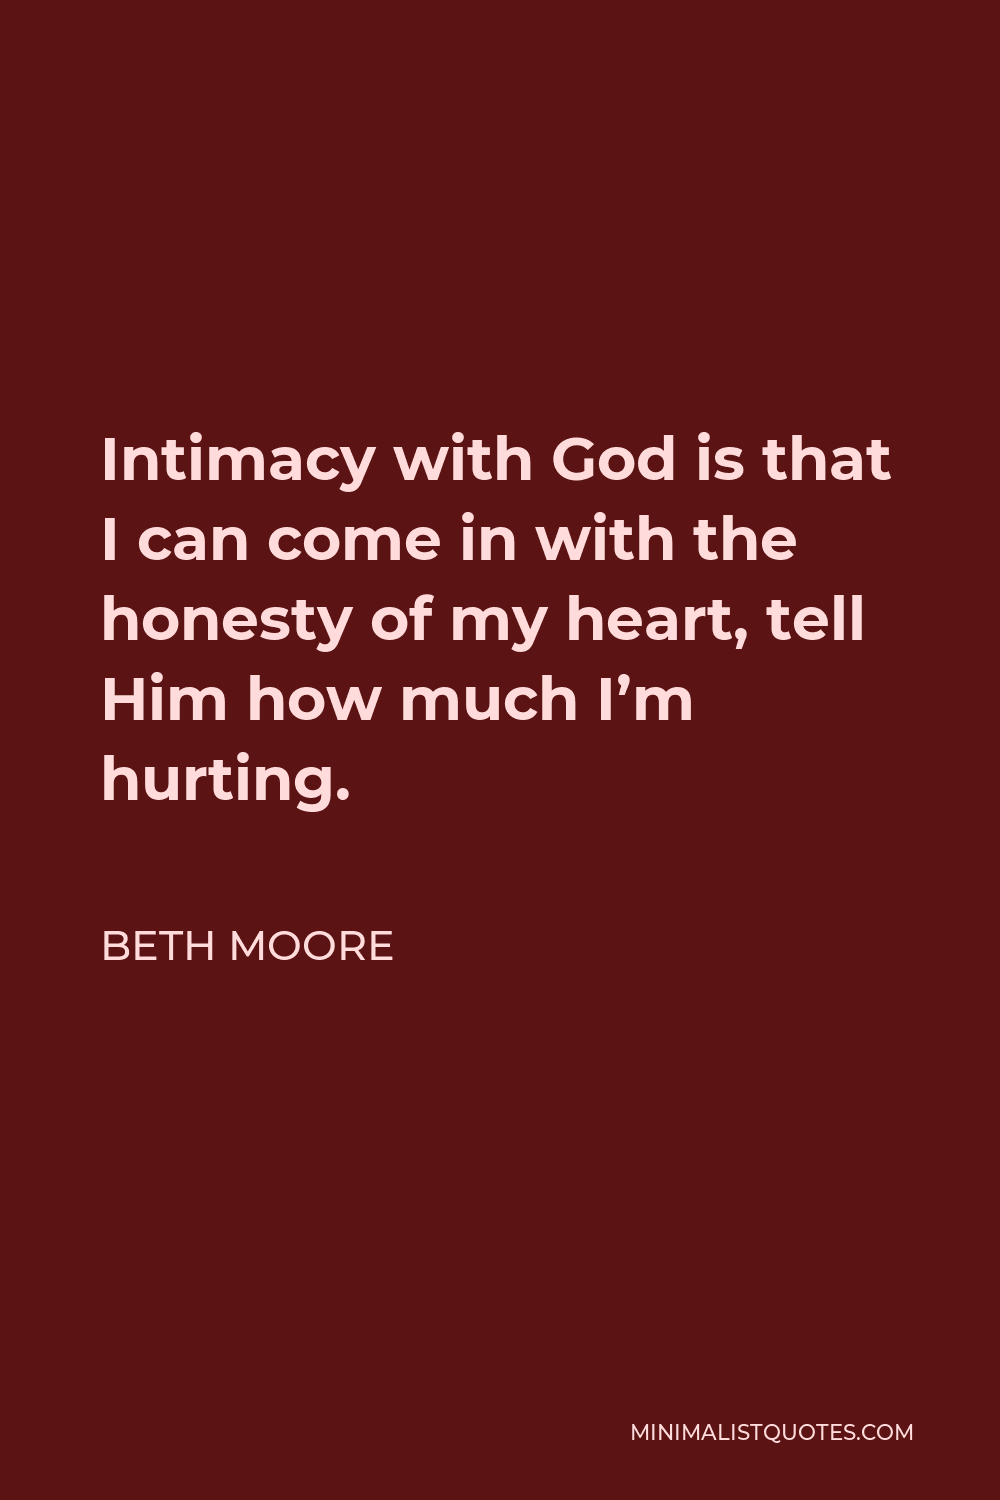 Beth Moore Quote - Intimacy with God is that I can come in with the honesty of my heart, tell Him how much I’m hurting.